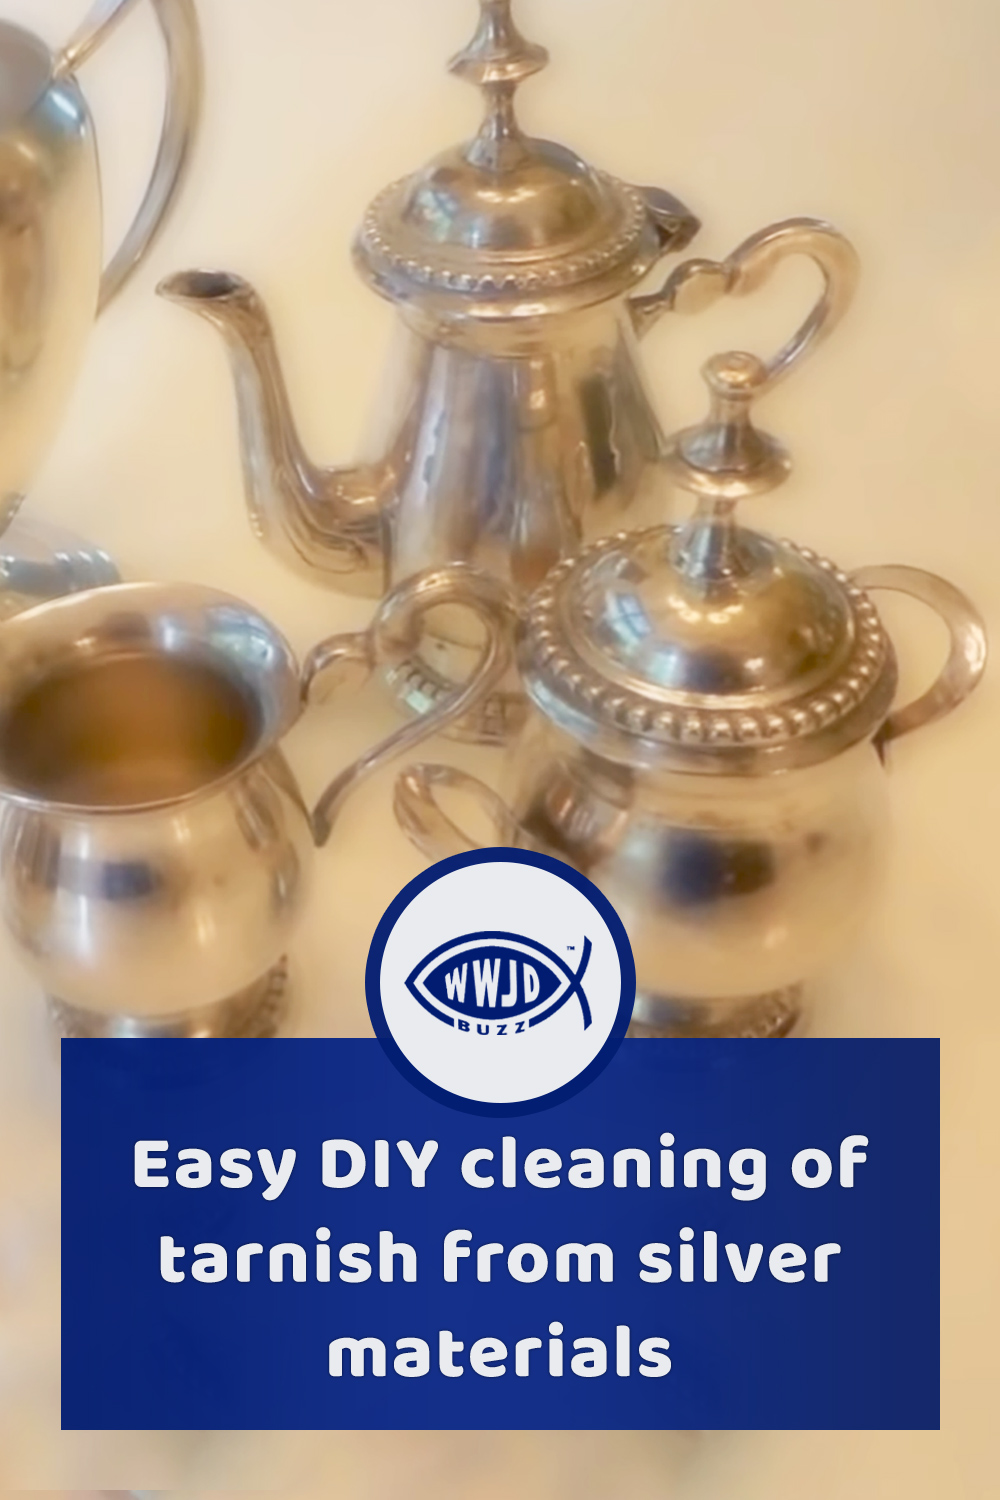 Easy DIY cleaning of tarnish from silver materials